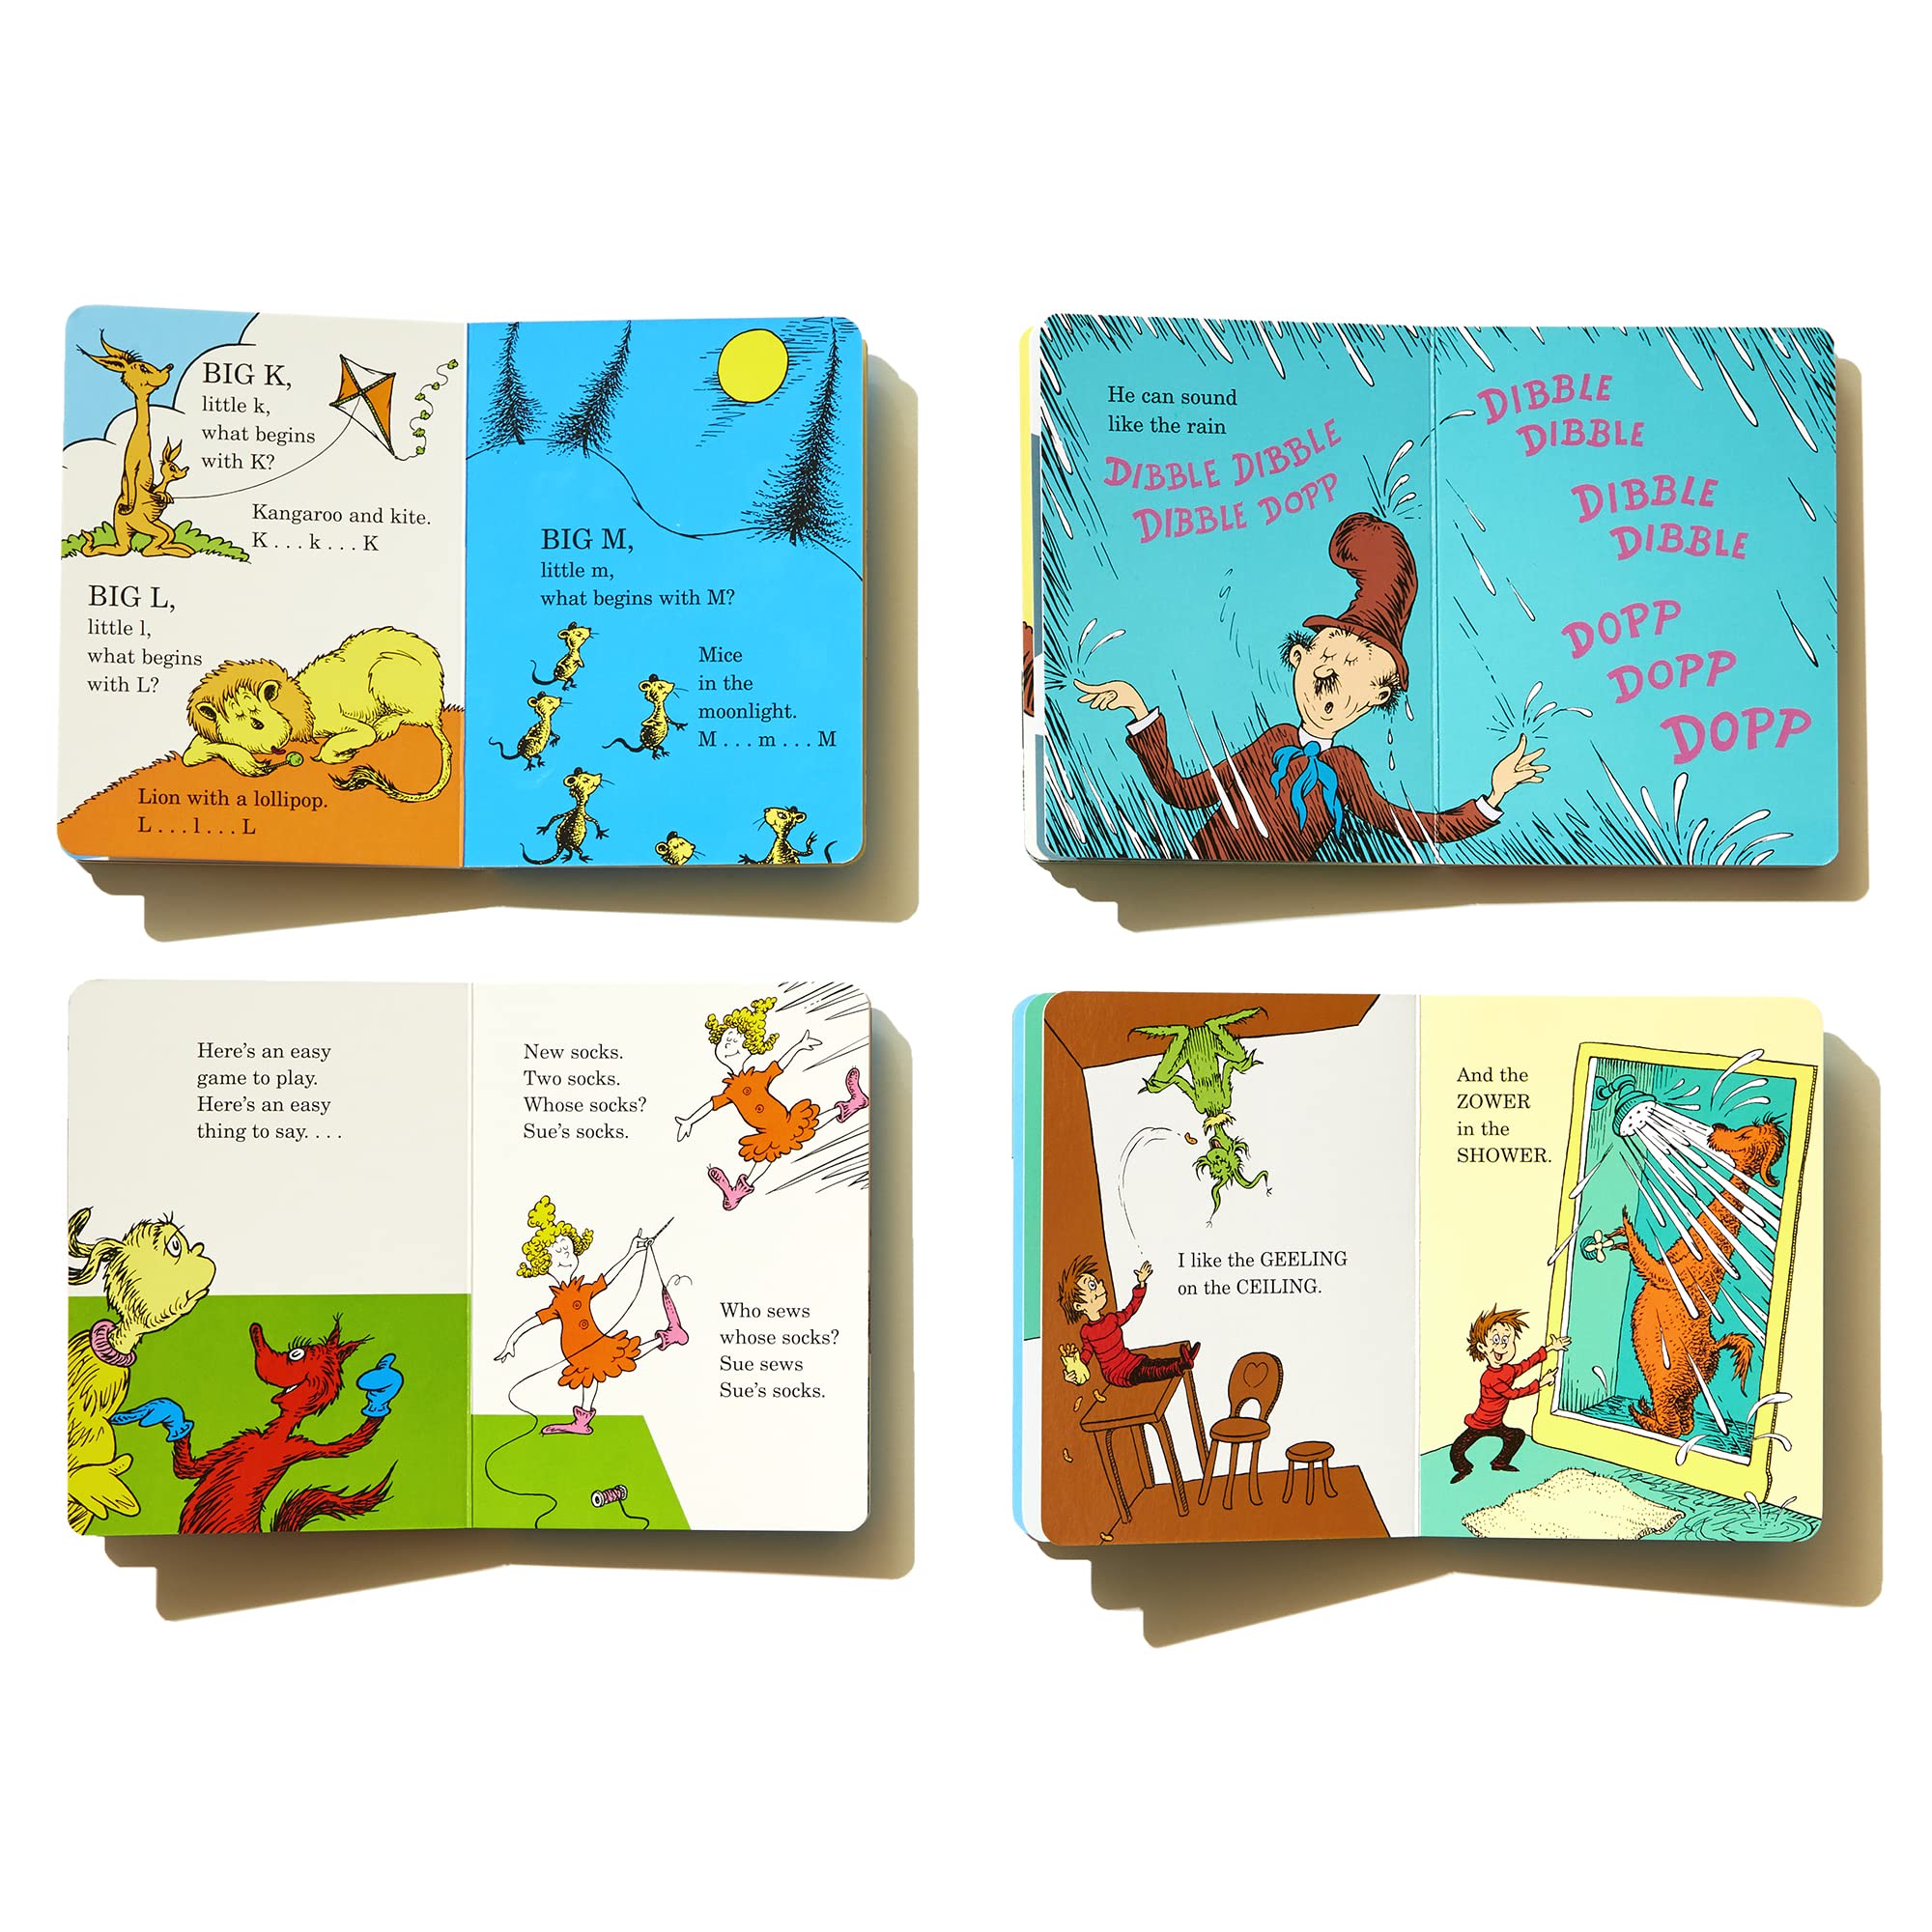 Little Green Box of Bright and Early Board Books: Fox in Socks; Mr. Brown Can Moo! Can You?; There's a Wocket in My Pocket!; Dr. Seuss's ABC (Bright & Early Board Books(TM))